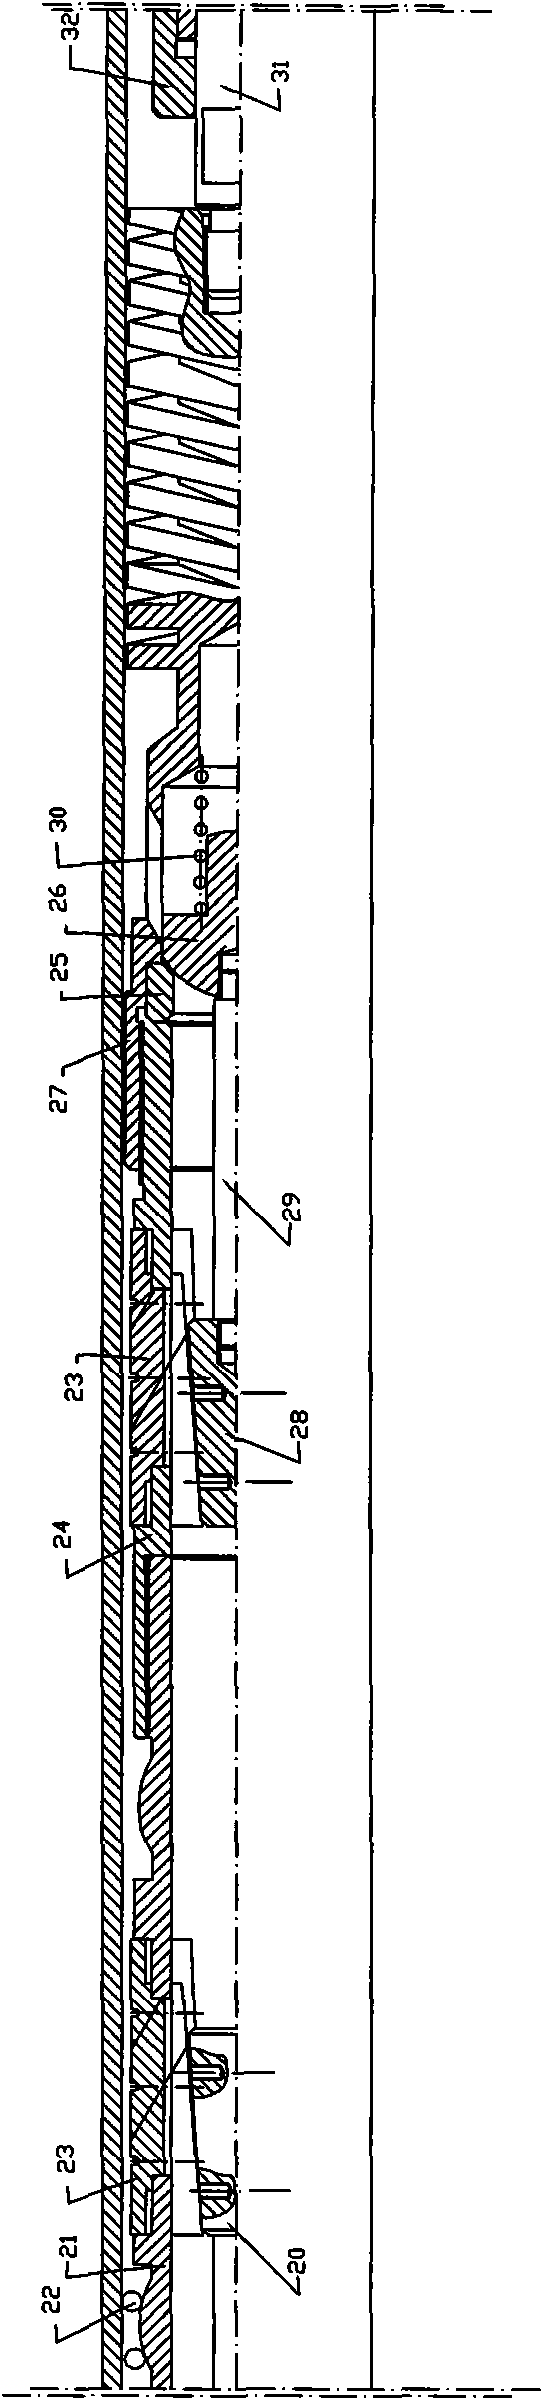 Multi-section centering self-rotating reducer oil pipe pump